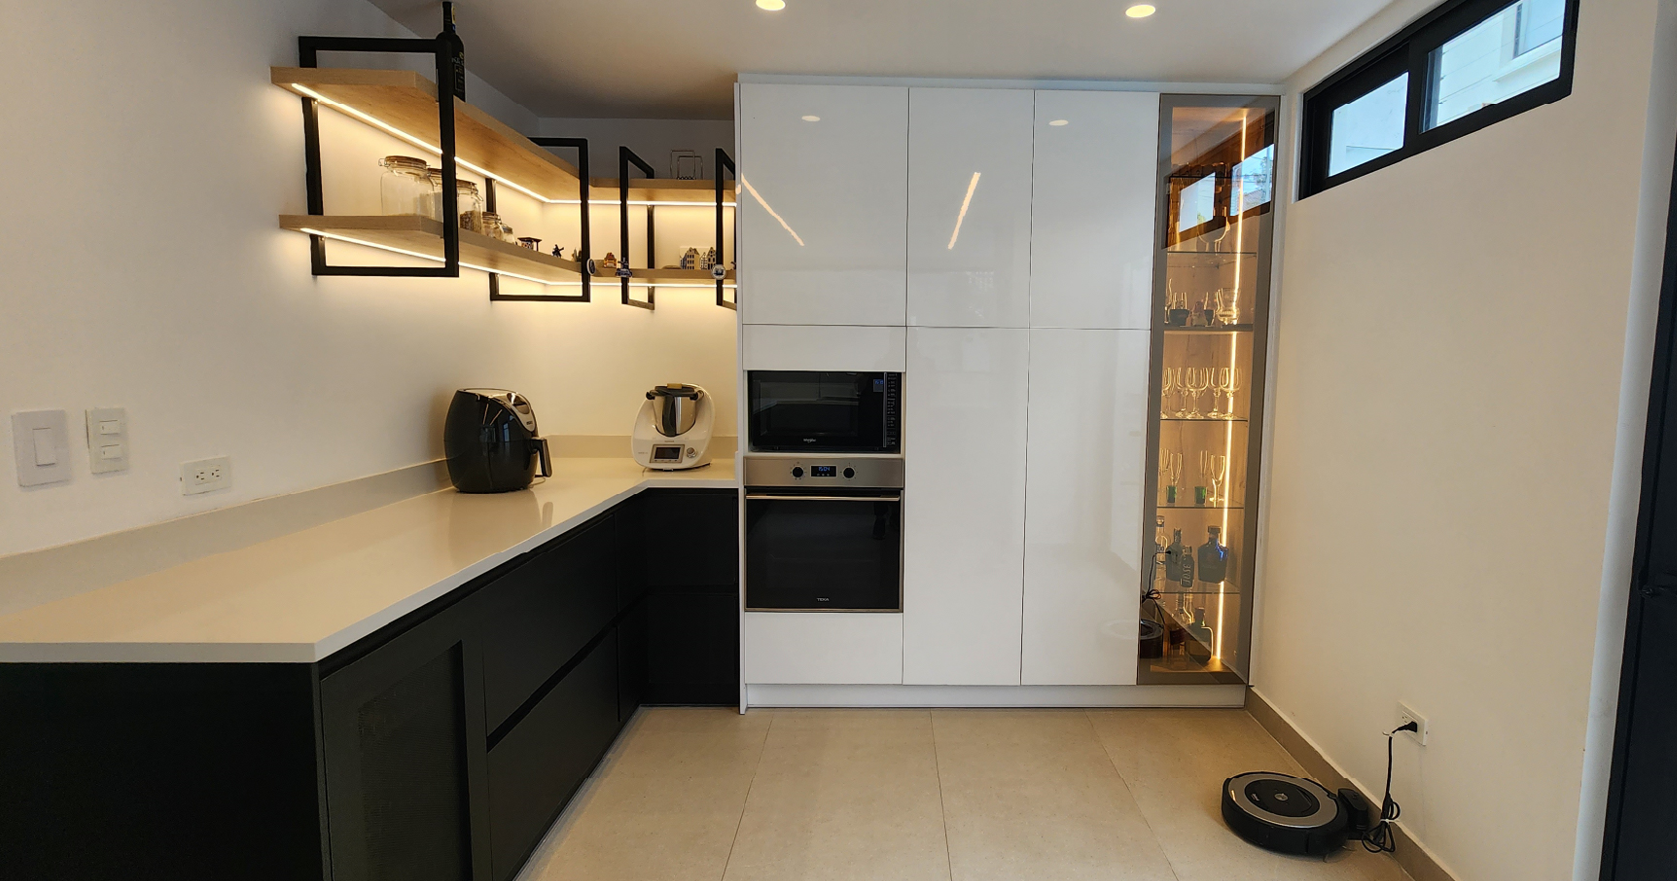 cupboards integrated into the decoration